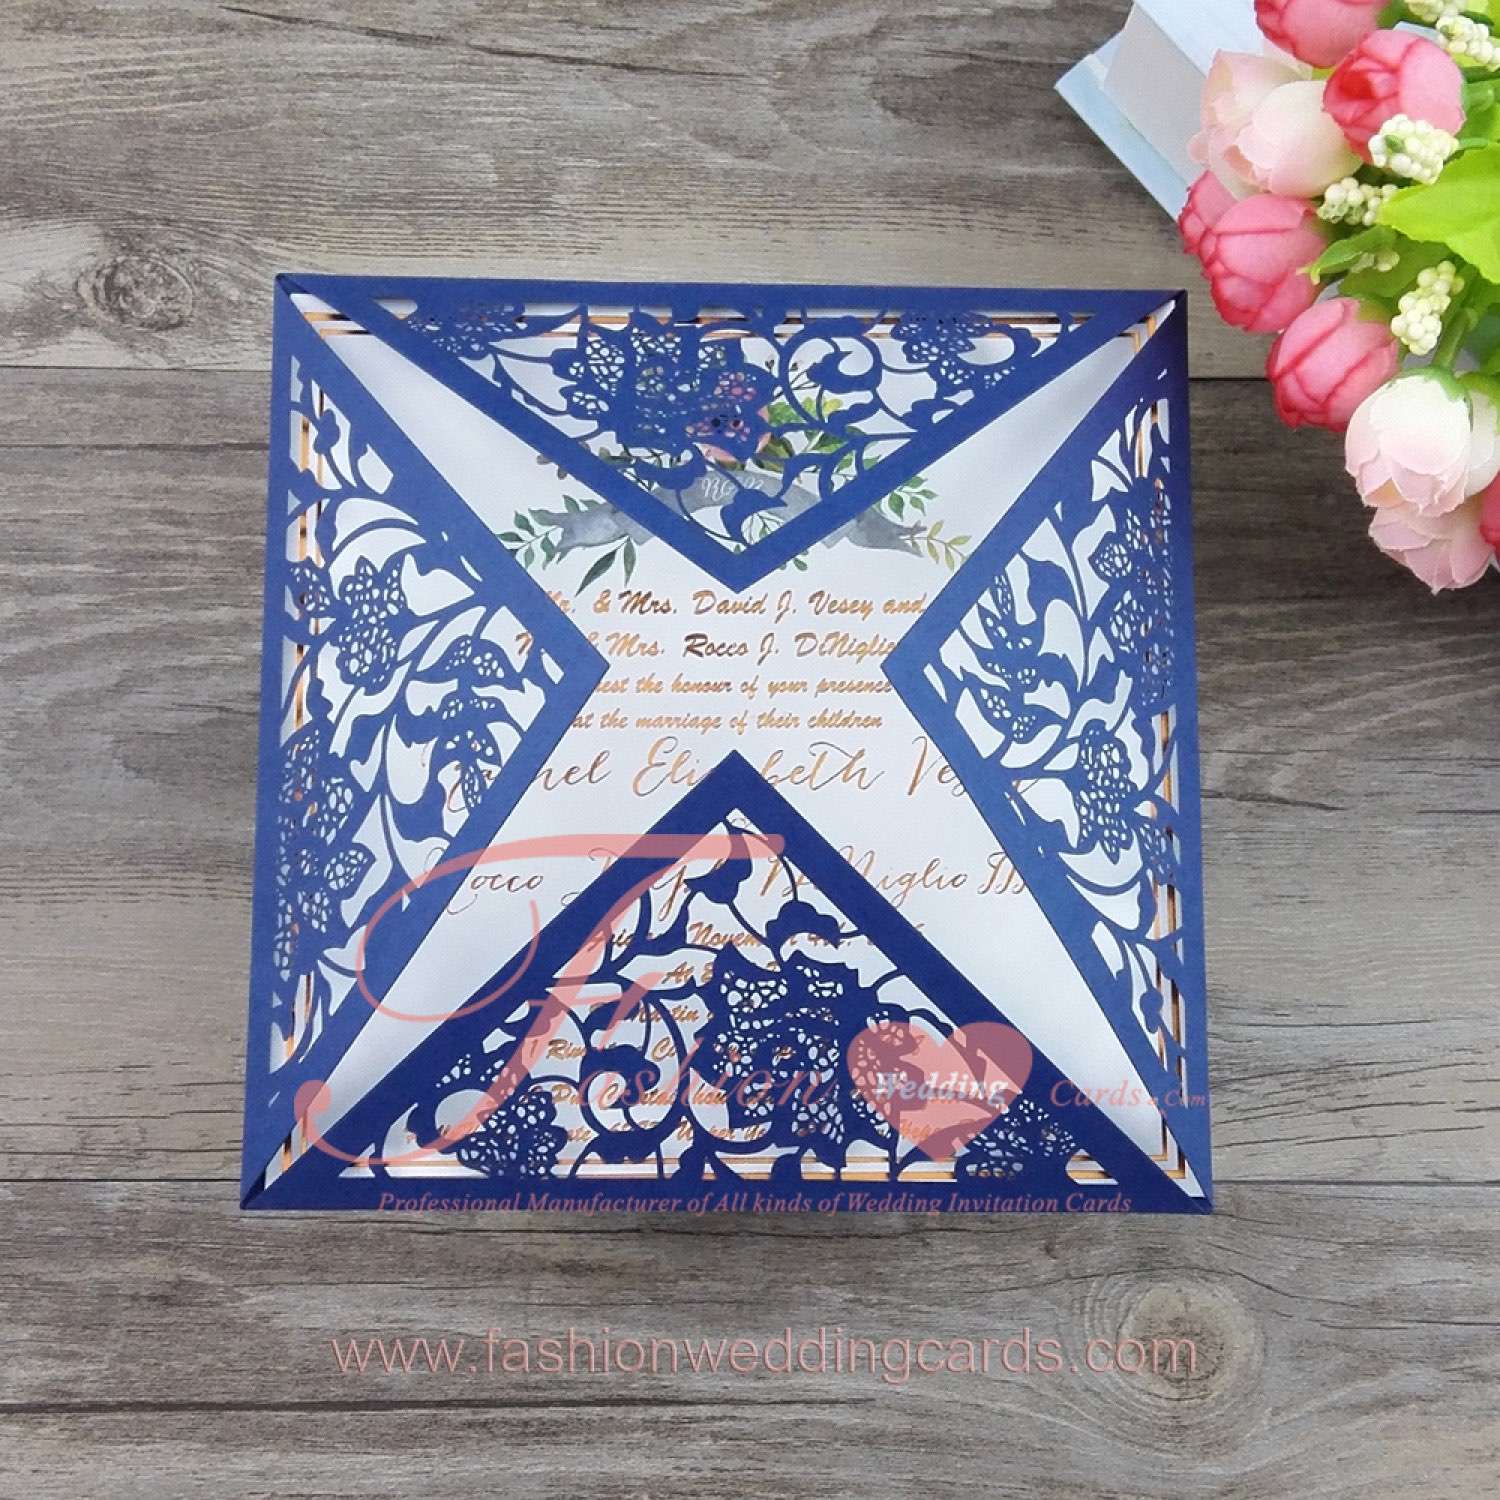 Cheap Navy Blue and White Laser Cut Wedding Invitations